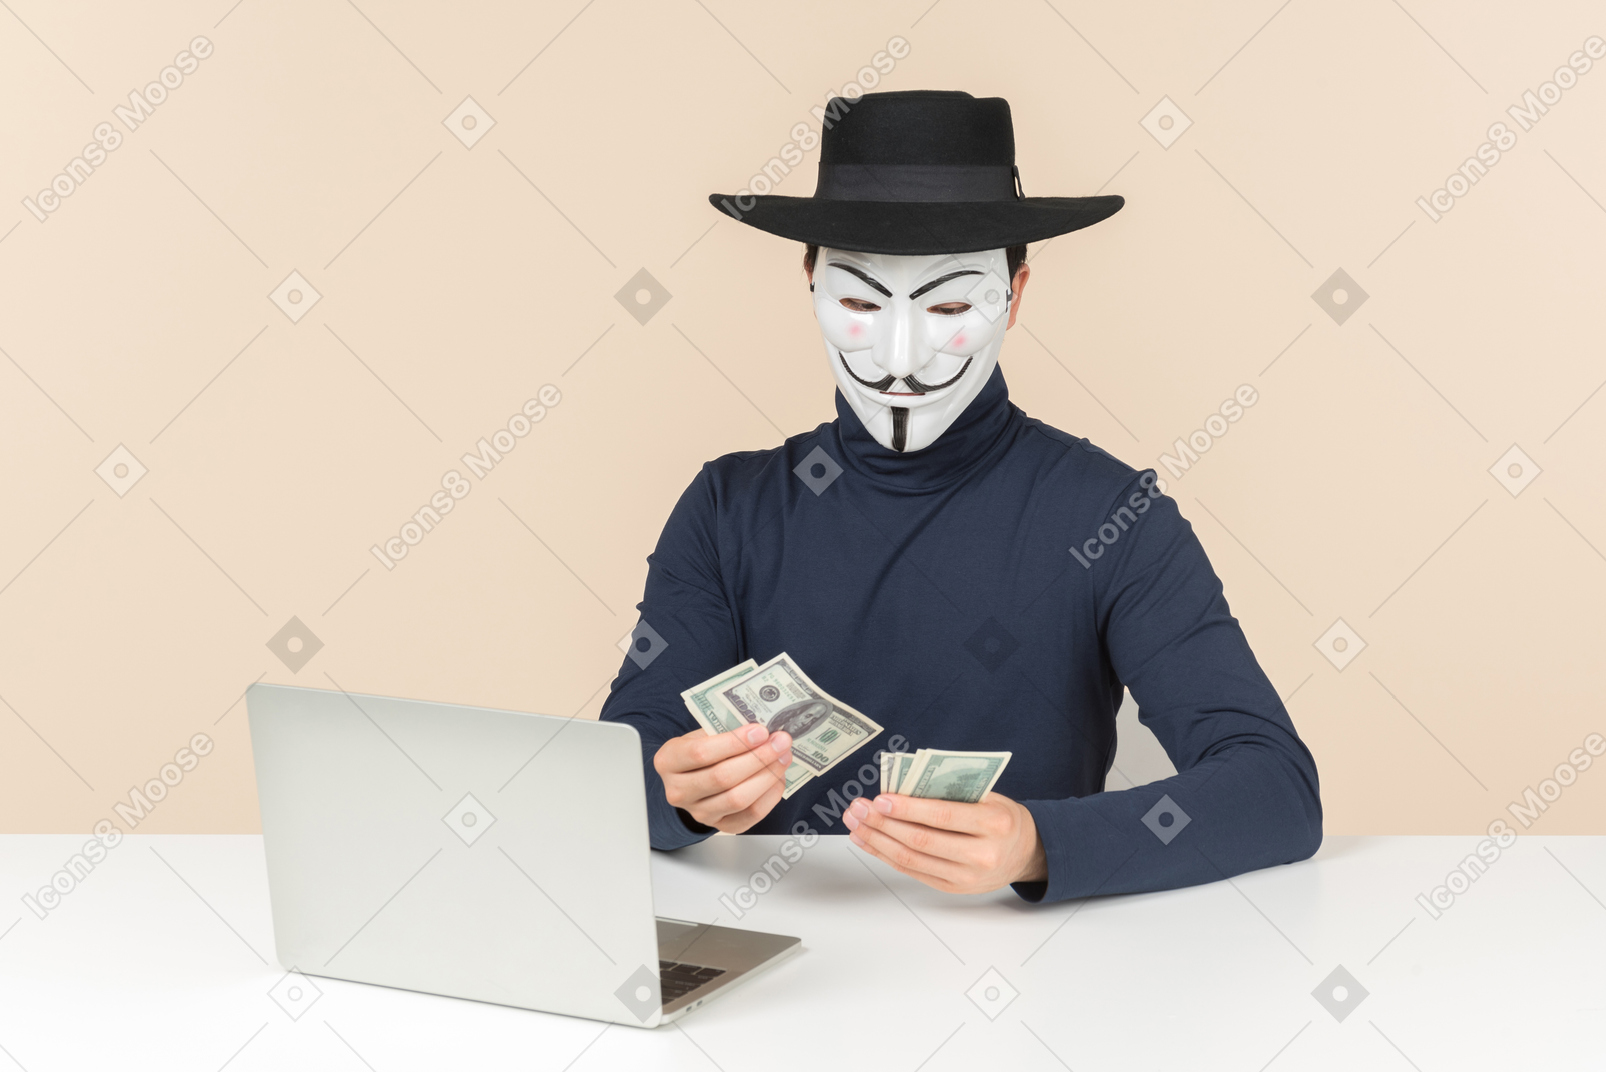 Hacker wearing vendetta mask counting money